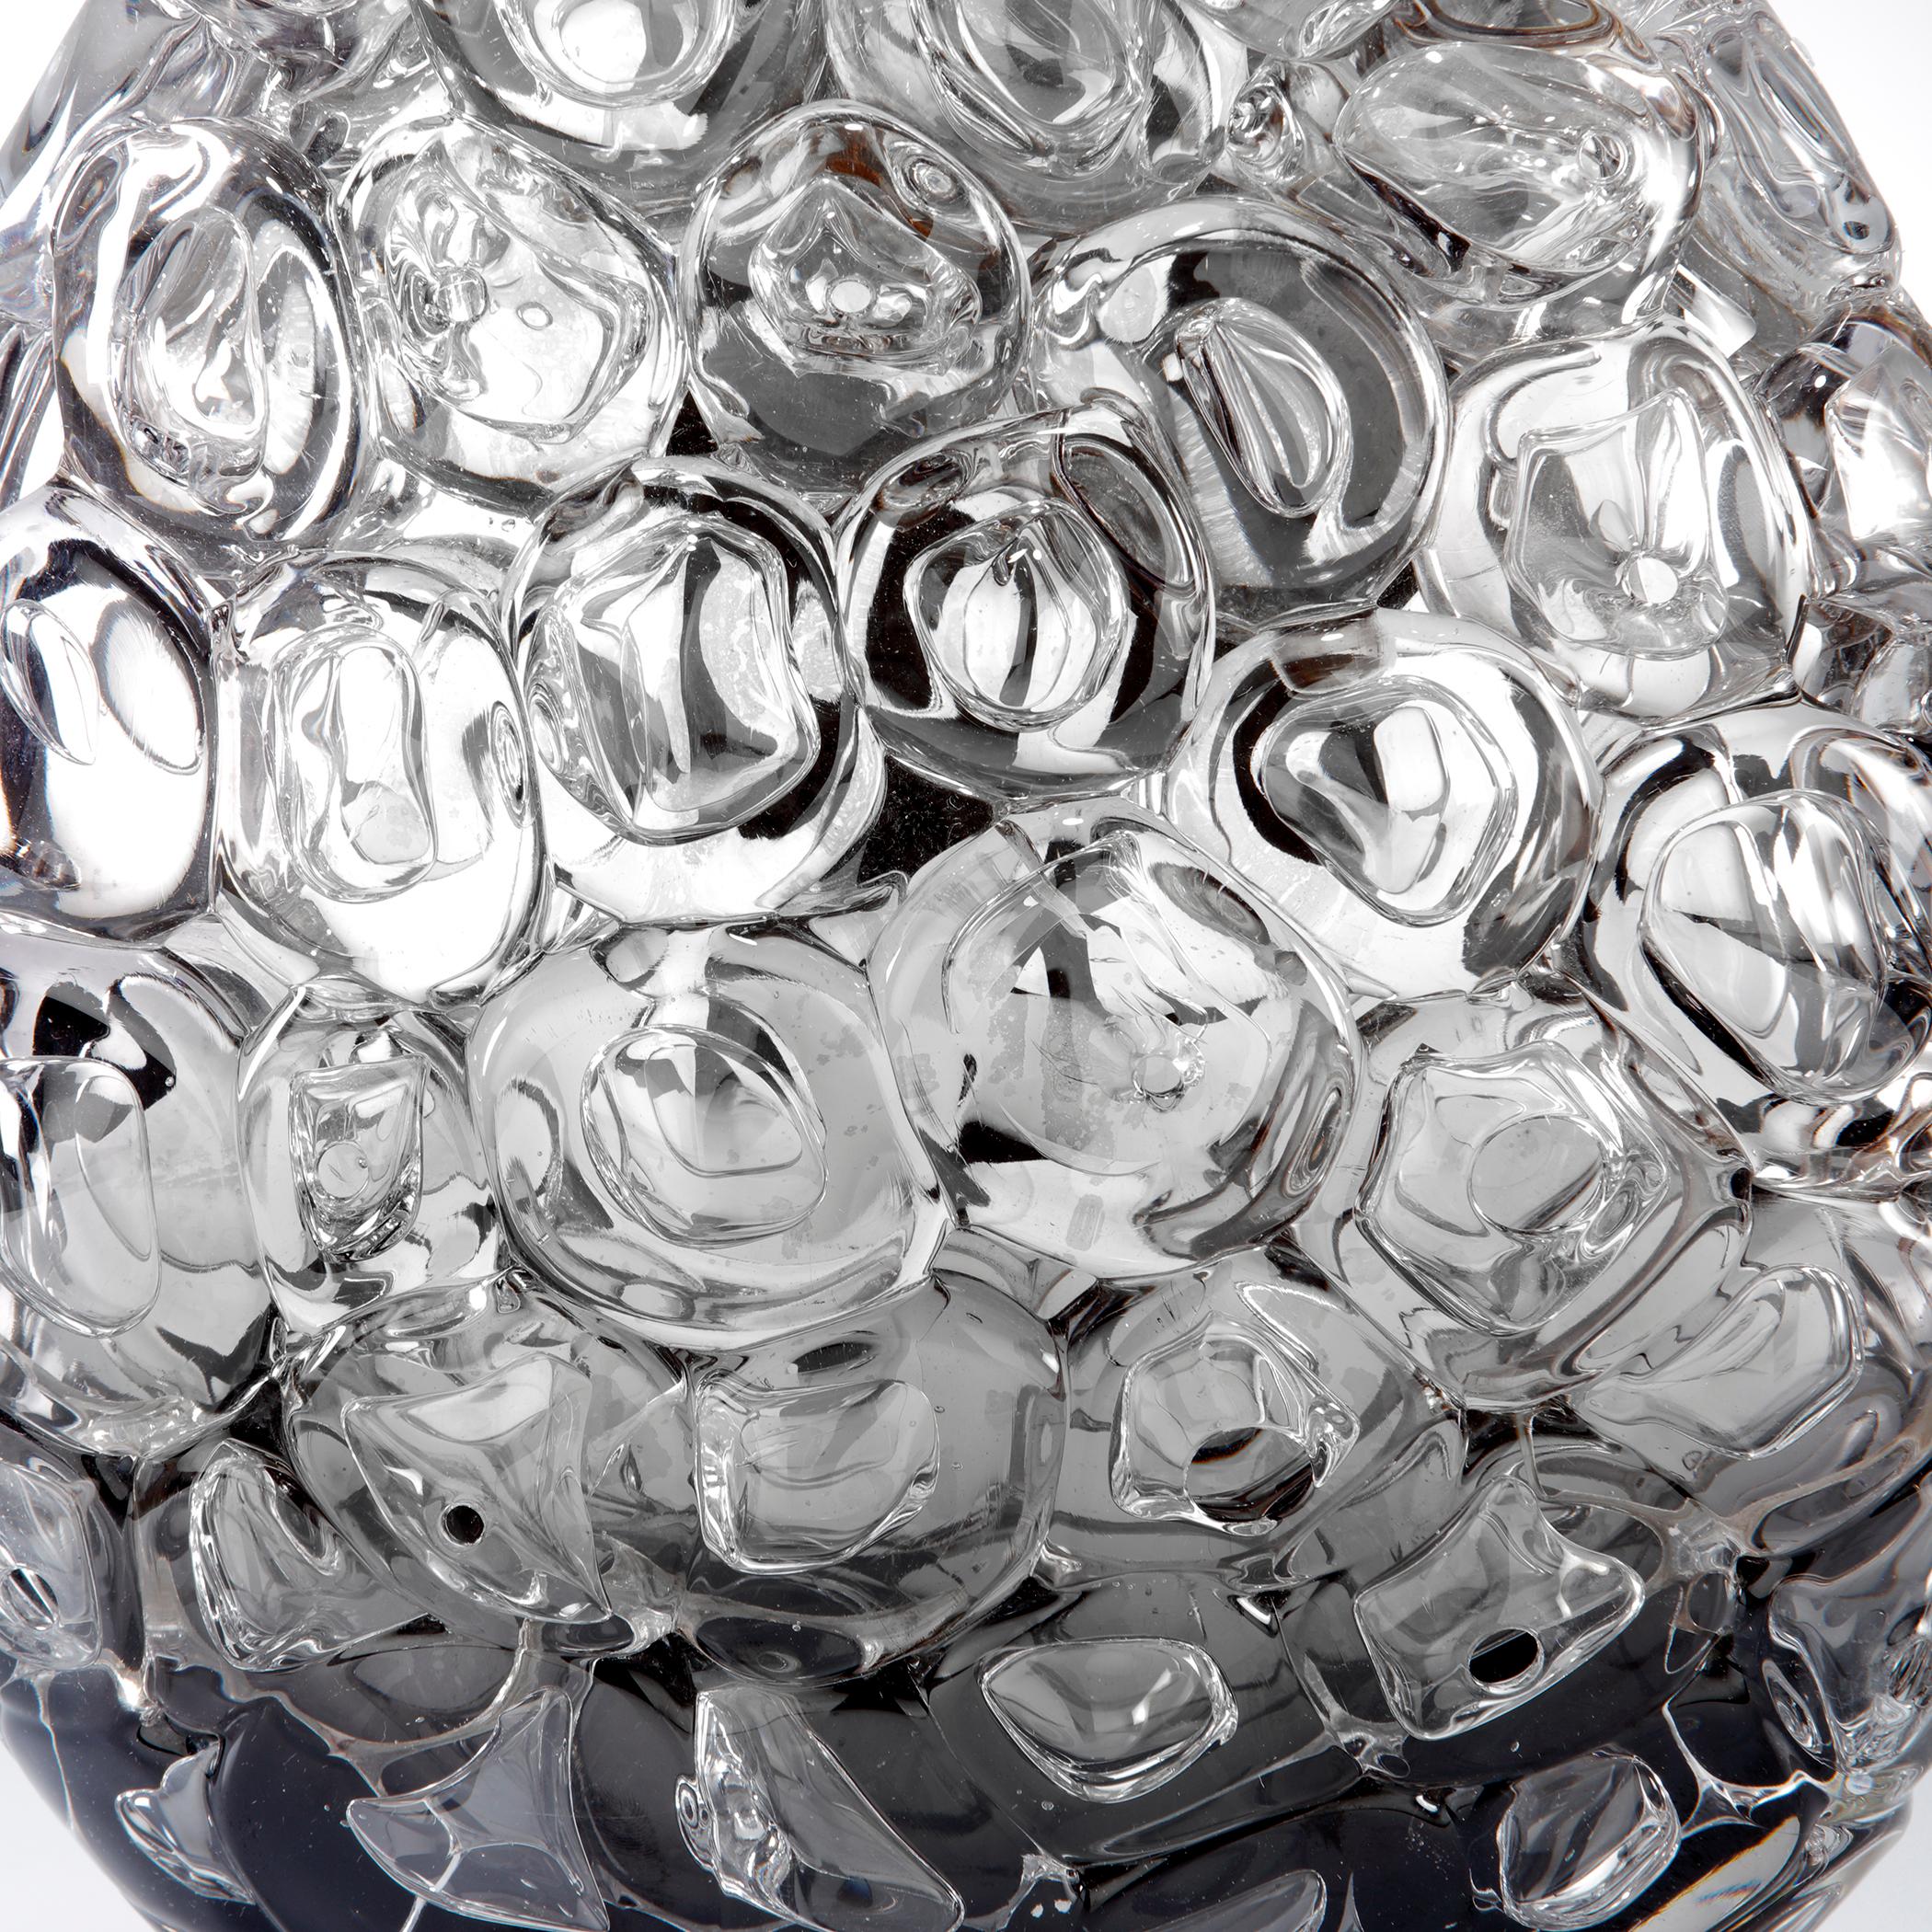 Hand-Crafted Bubblewrap in Monochrome I, a Silver and Clear Glass Vase by Allister Malcolm